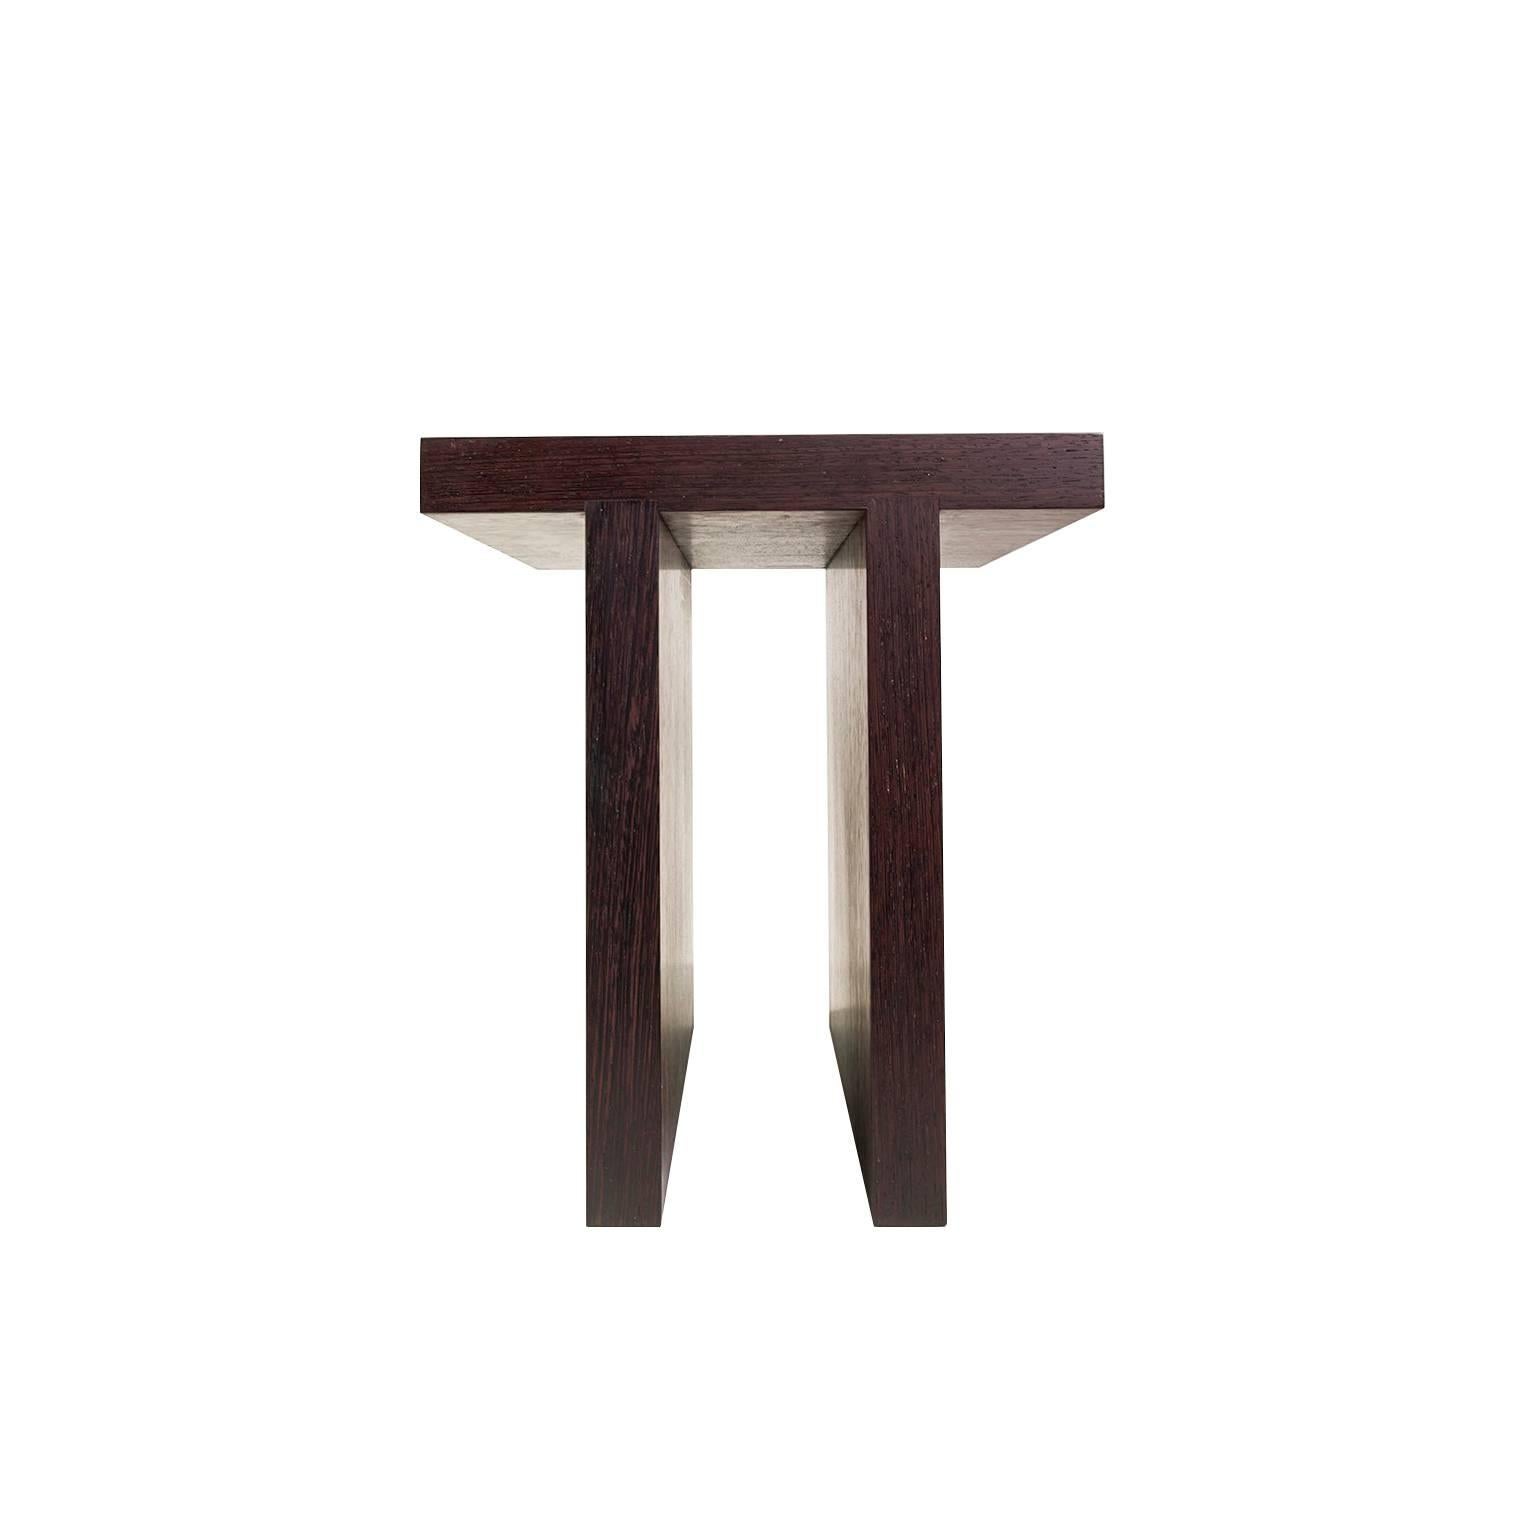 T nesting tables by Michael Boyd for PLANEfurniture. From the custom shop. Offered here in mahogany with a stain finish.

PLANEfurniture is an idea whose time has come: the concept is to create unfussy, beautiful furniture that makes you think,